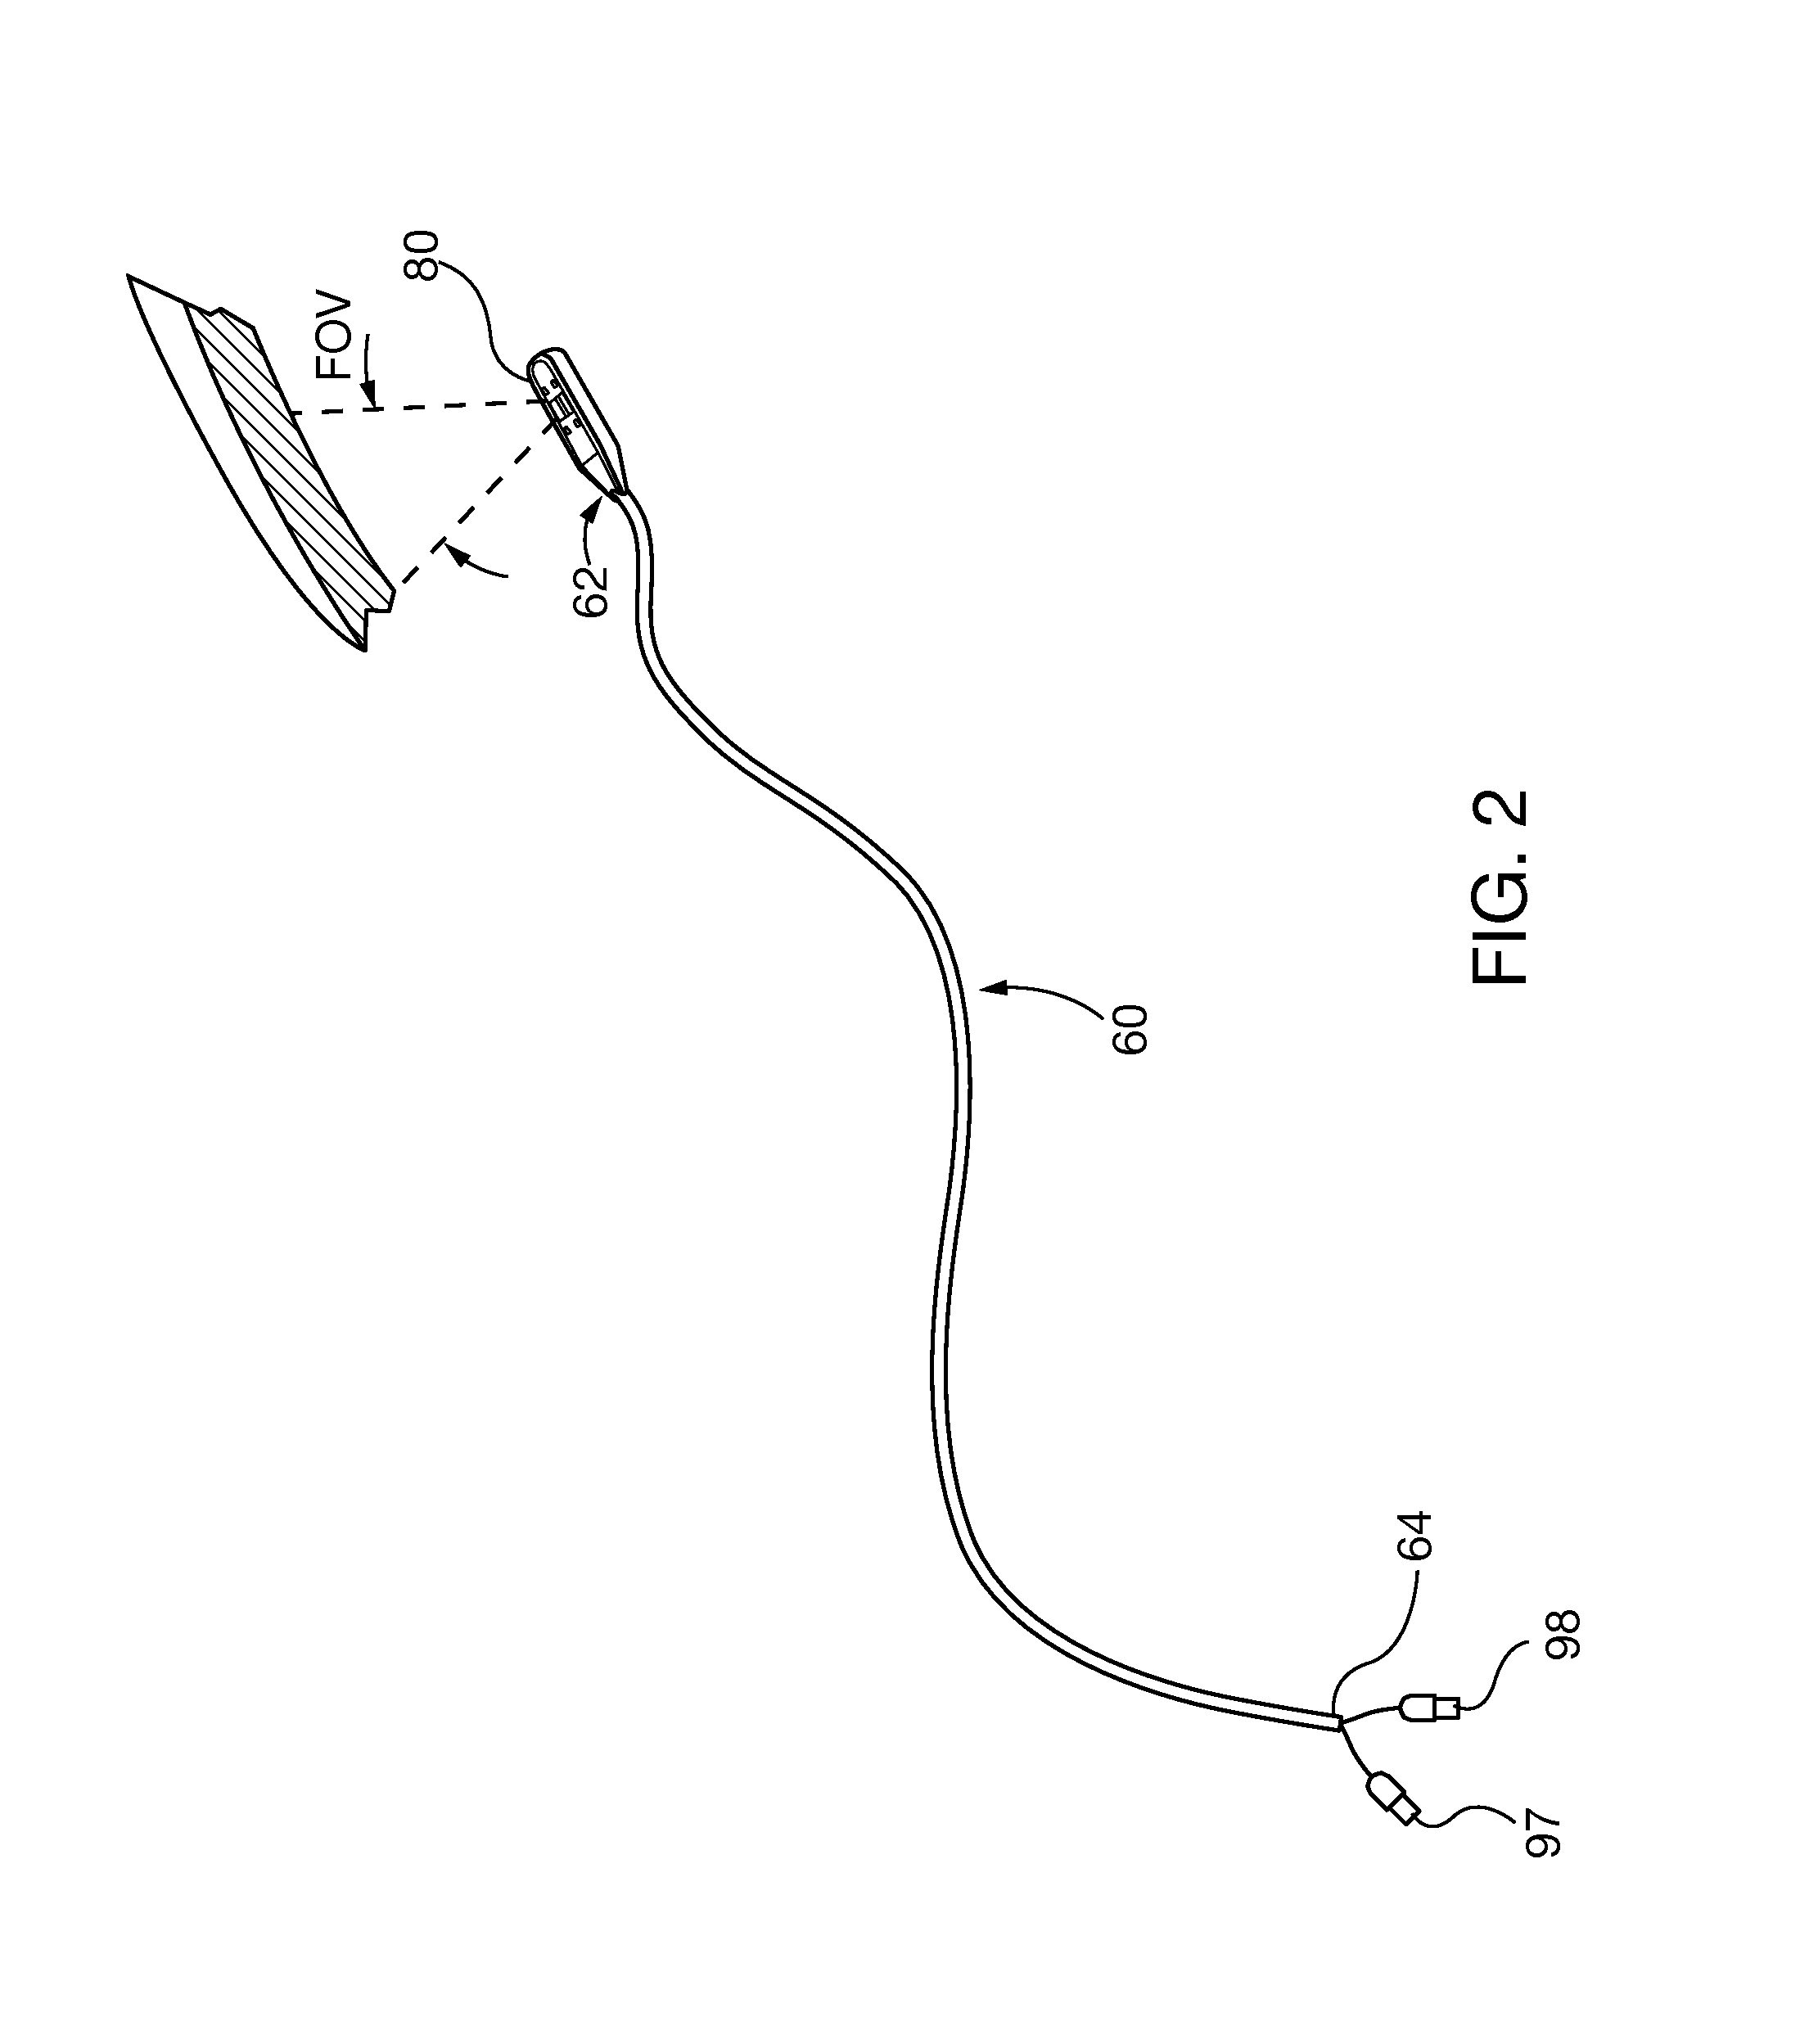 Optical inspection scope with deformable, self-supporting deployment tether